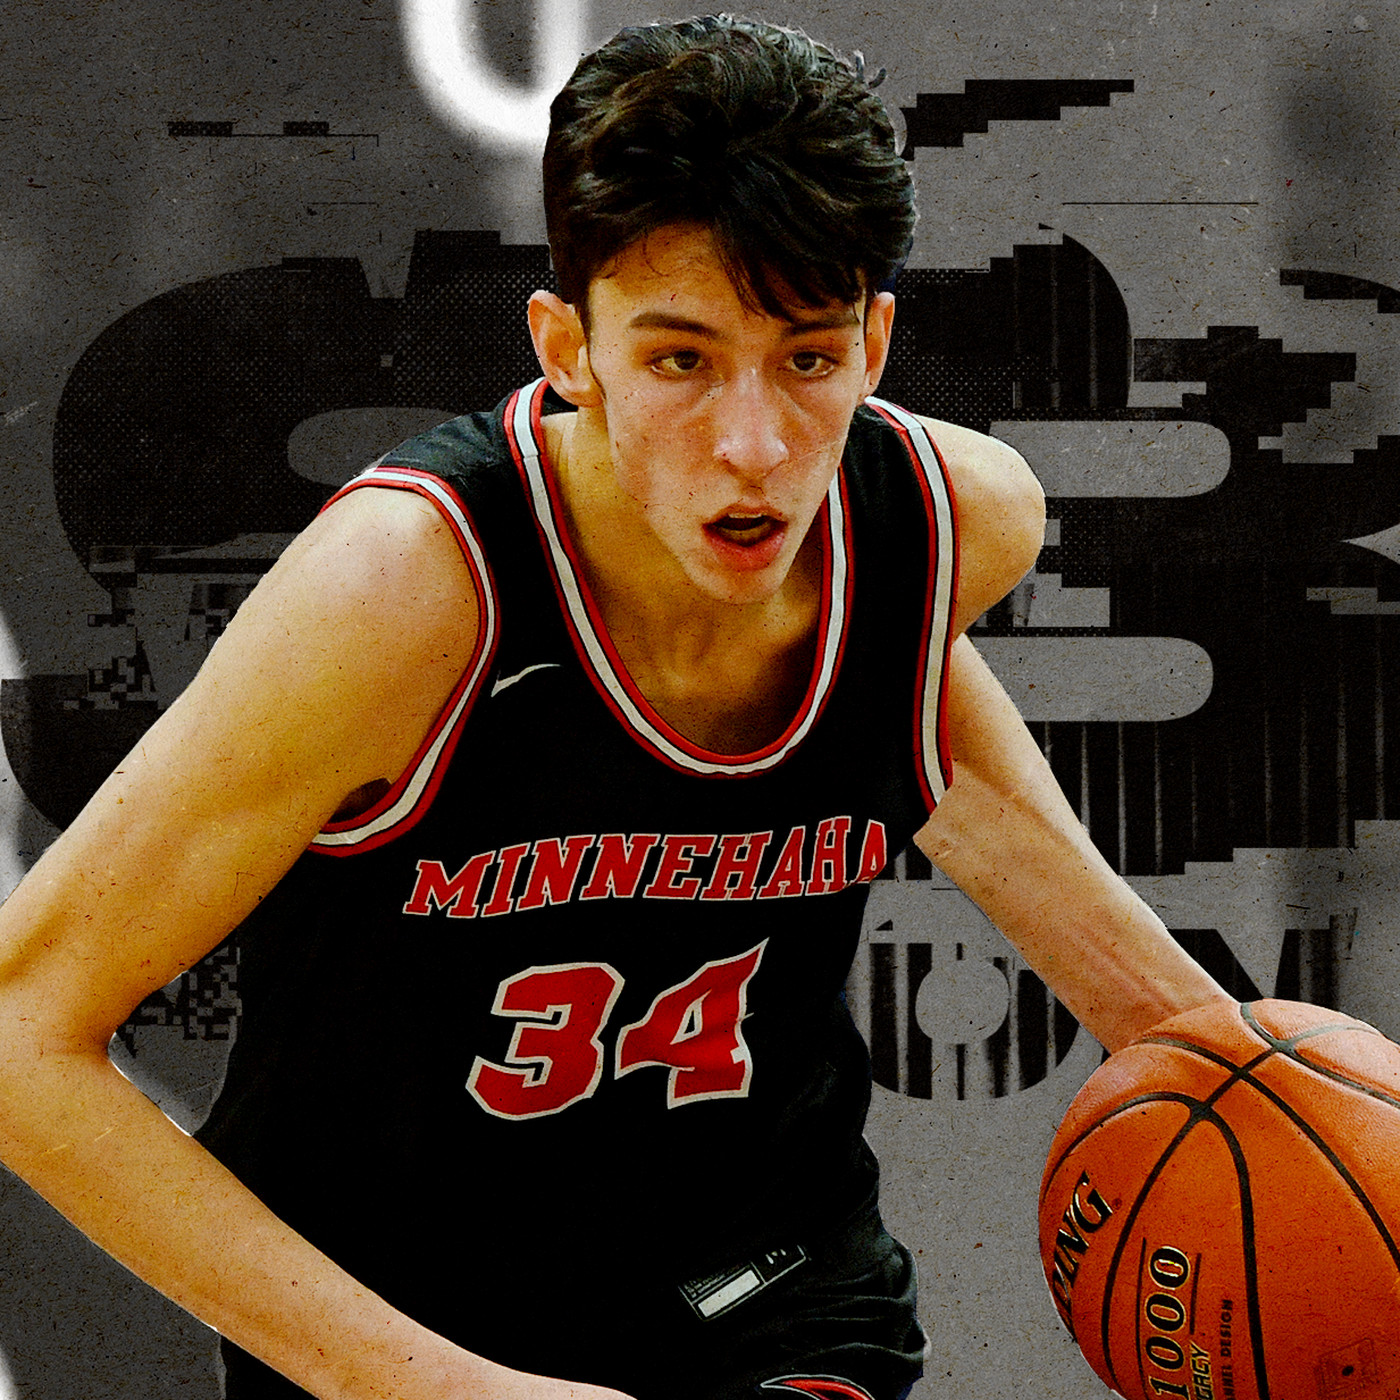 Chet Holmgren's rise into a top NBA draft pick, according to his coach and a scout